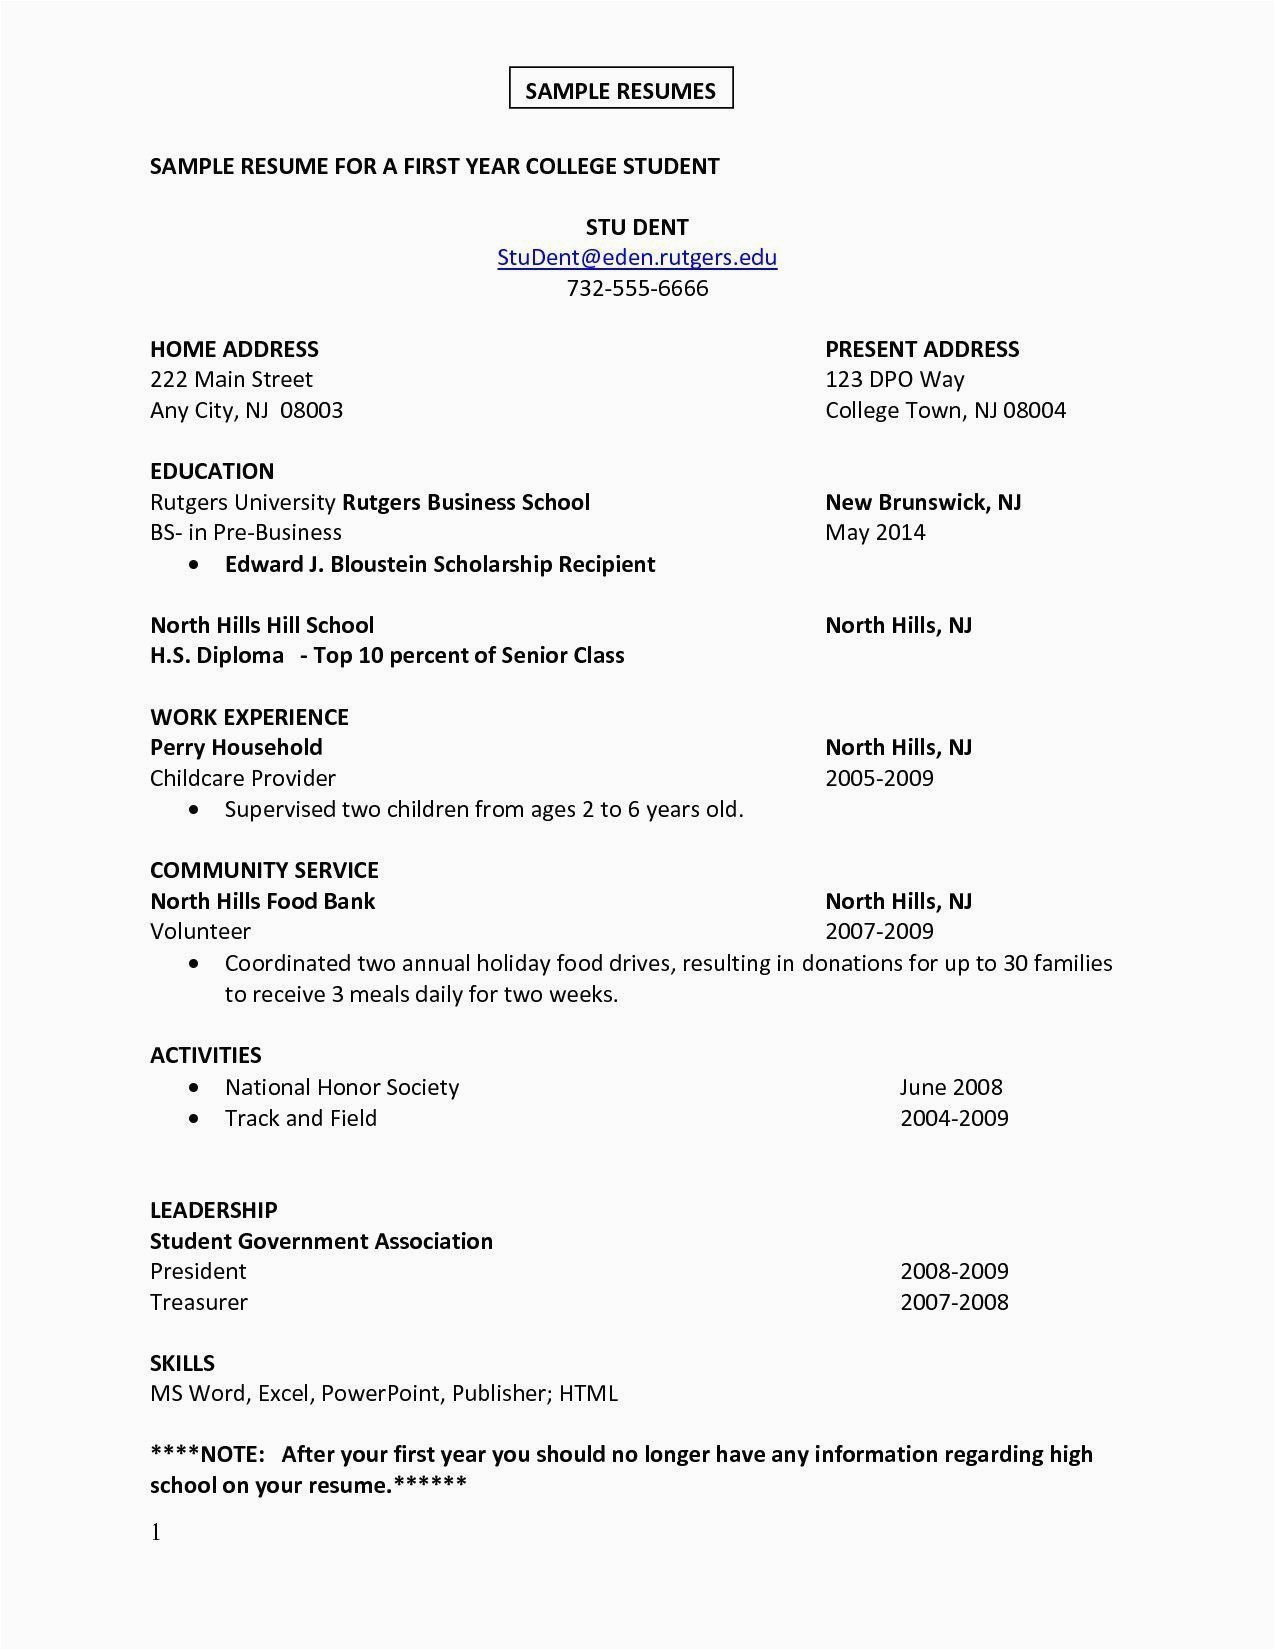 Best Resume Template for First Job First Job College Student Resume Template Best Resume